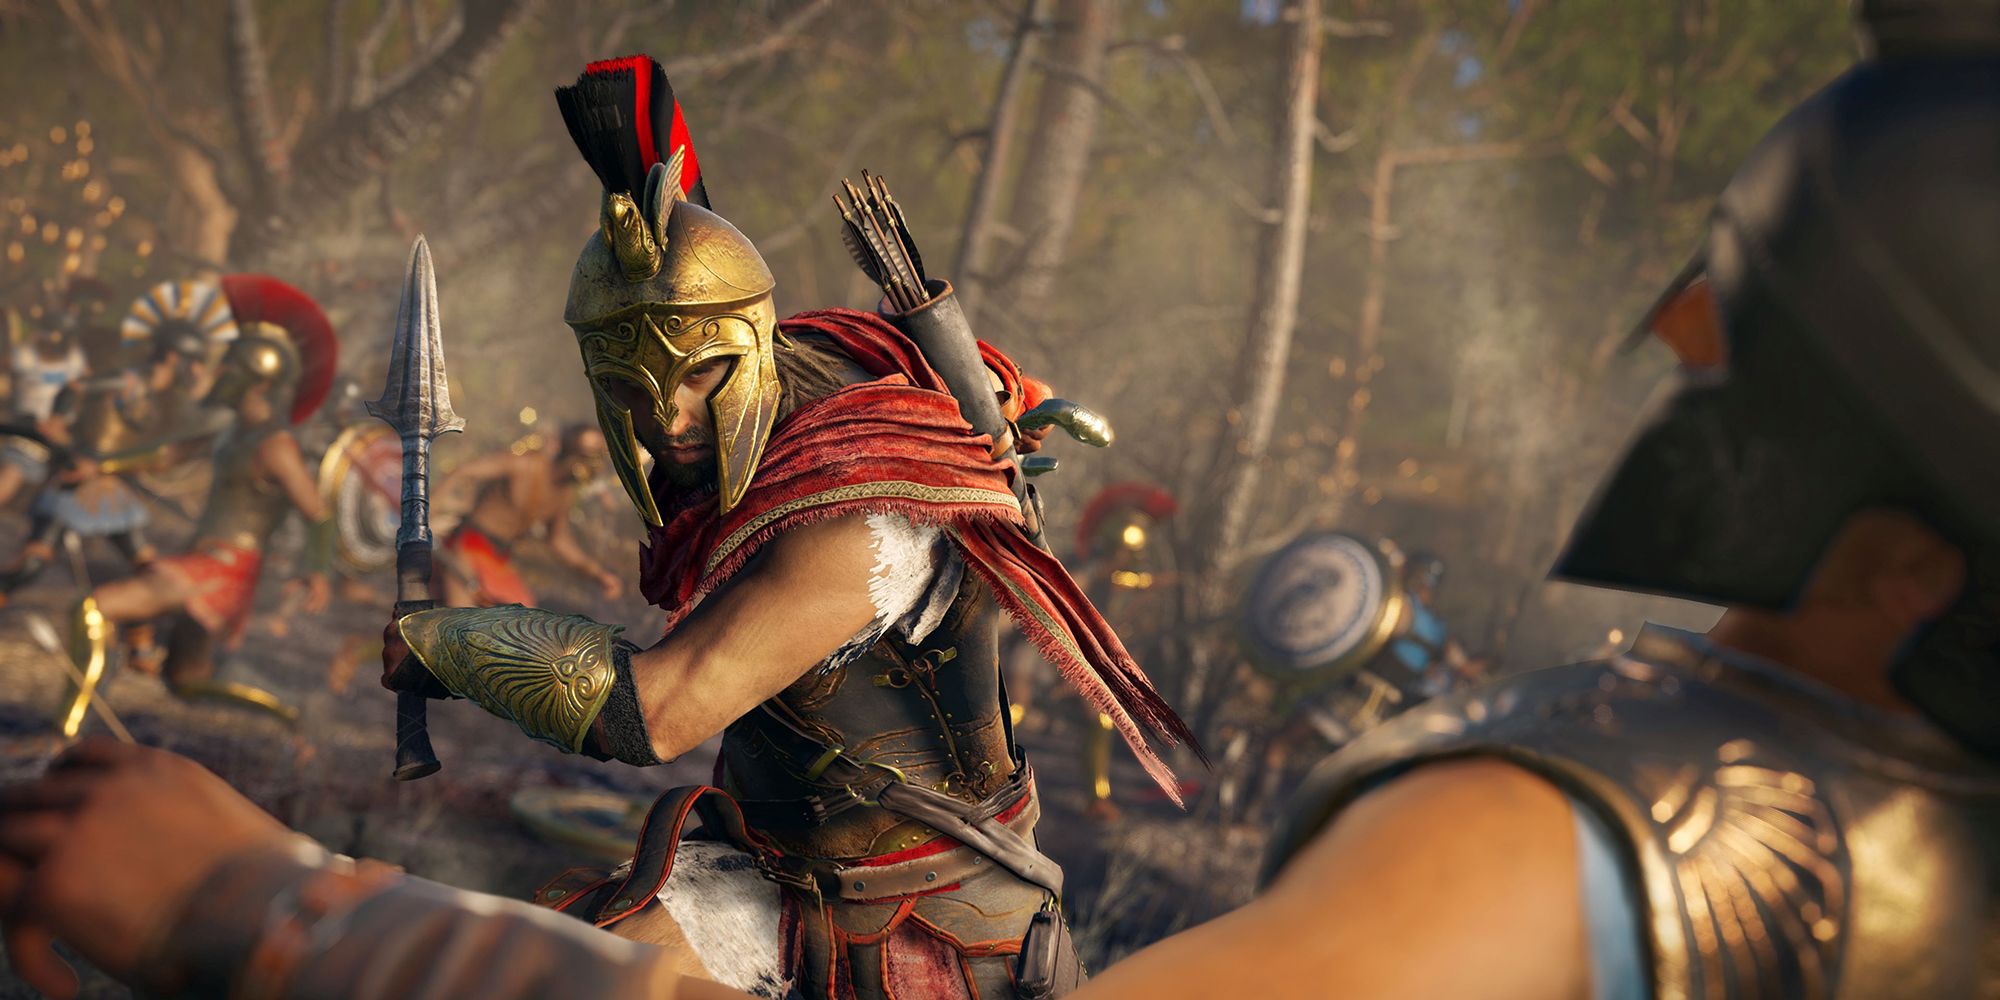 fordøjelse dollar patologisk How to Get More Crafting Materials in Assassin's Creed Odyssey